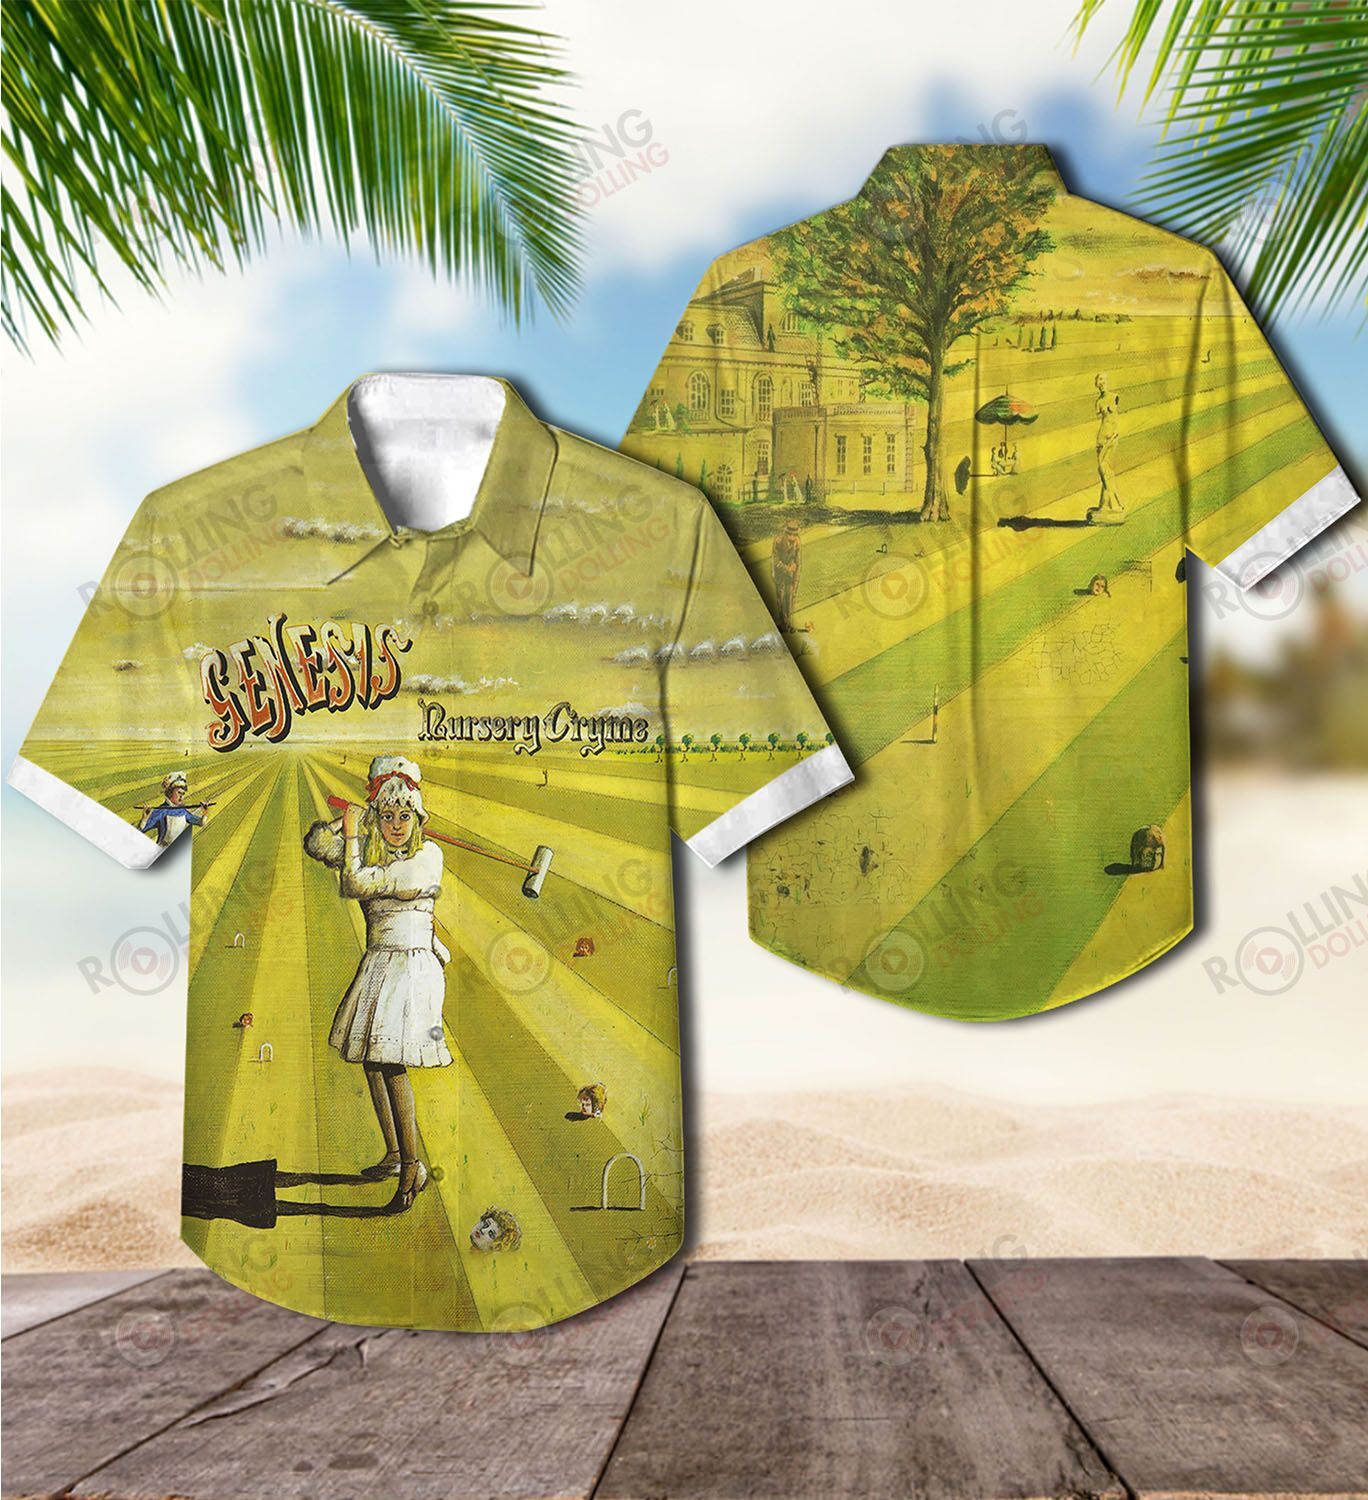 Now you can show off your love of all things band with this Hawaiian Shirt 155